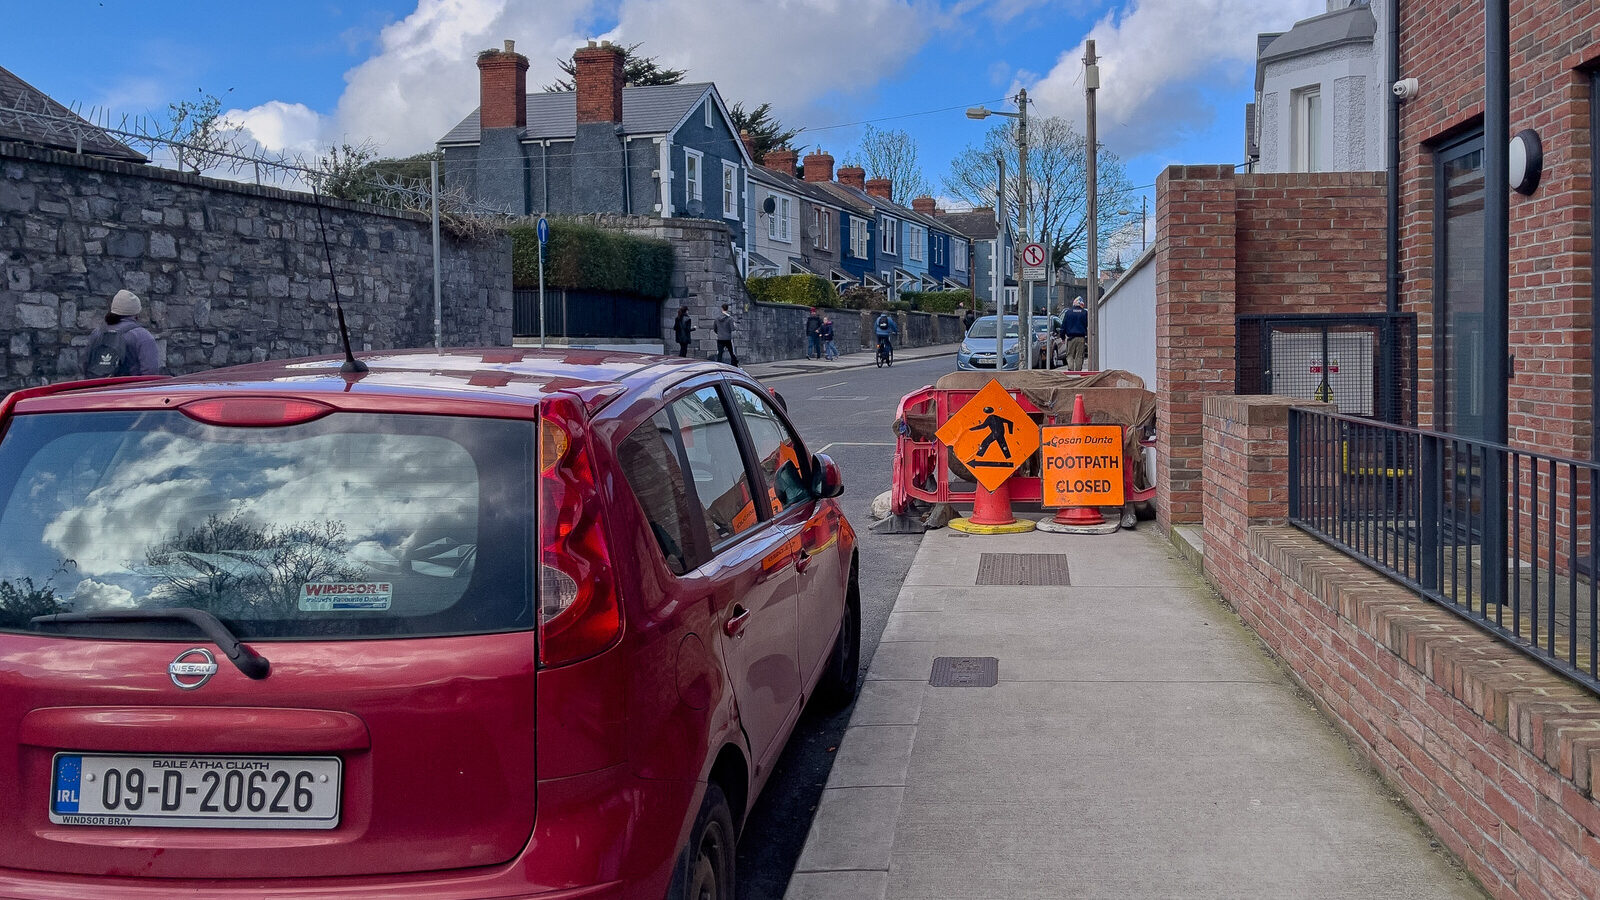 EXPLORING GRANGEGORMAN LOWER [WHICH IS BOTH A STREET AND AN AREA OR DISTRICT]-229023-1